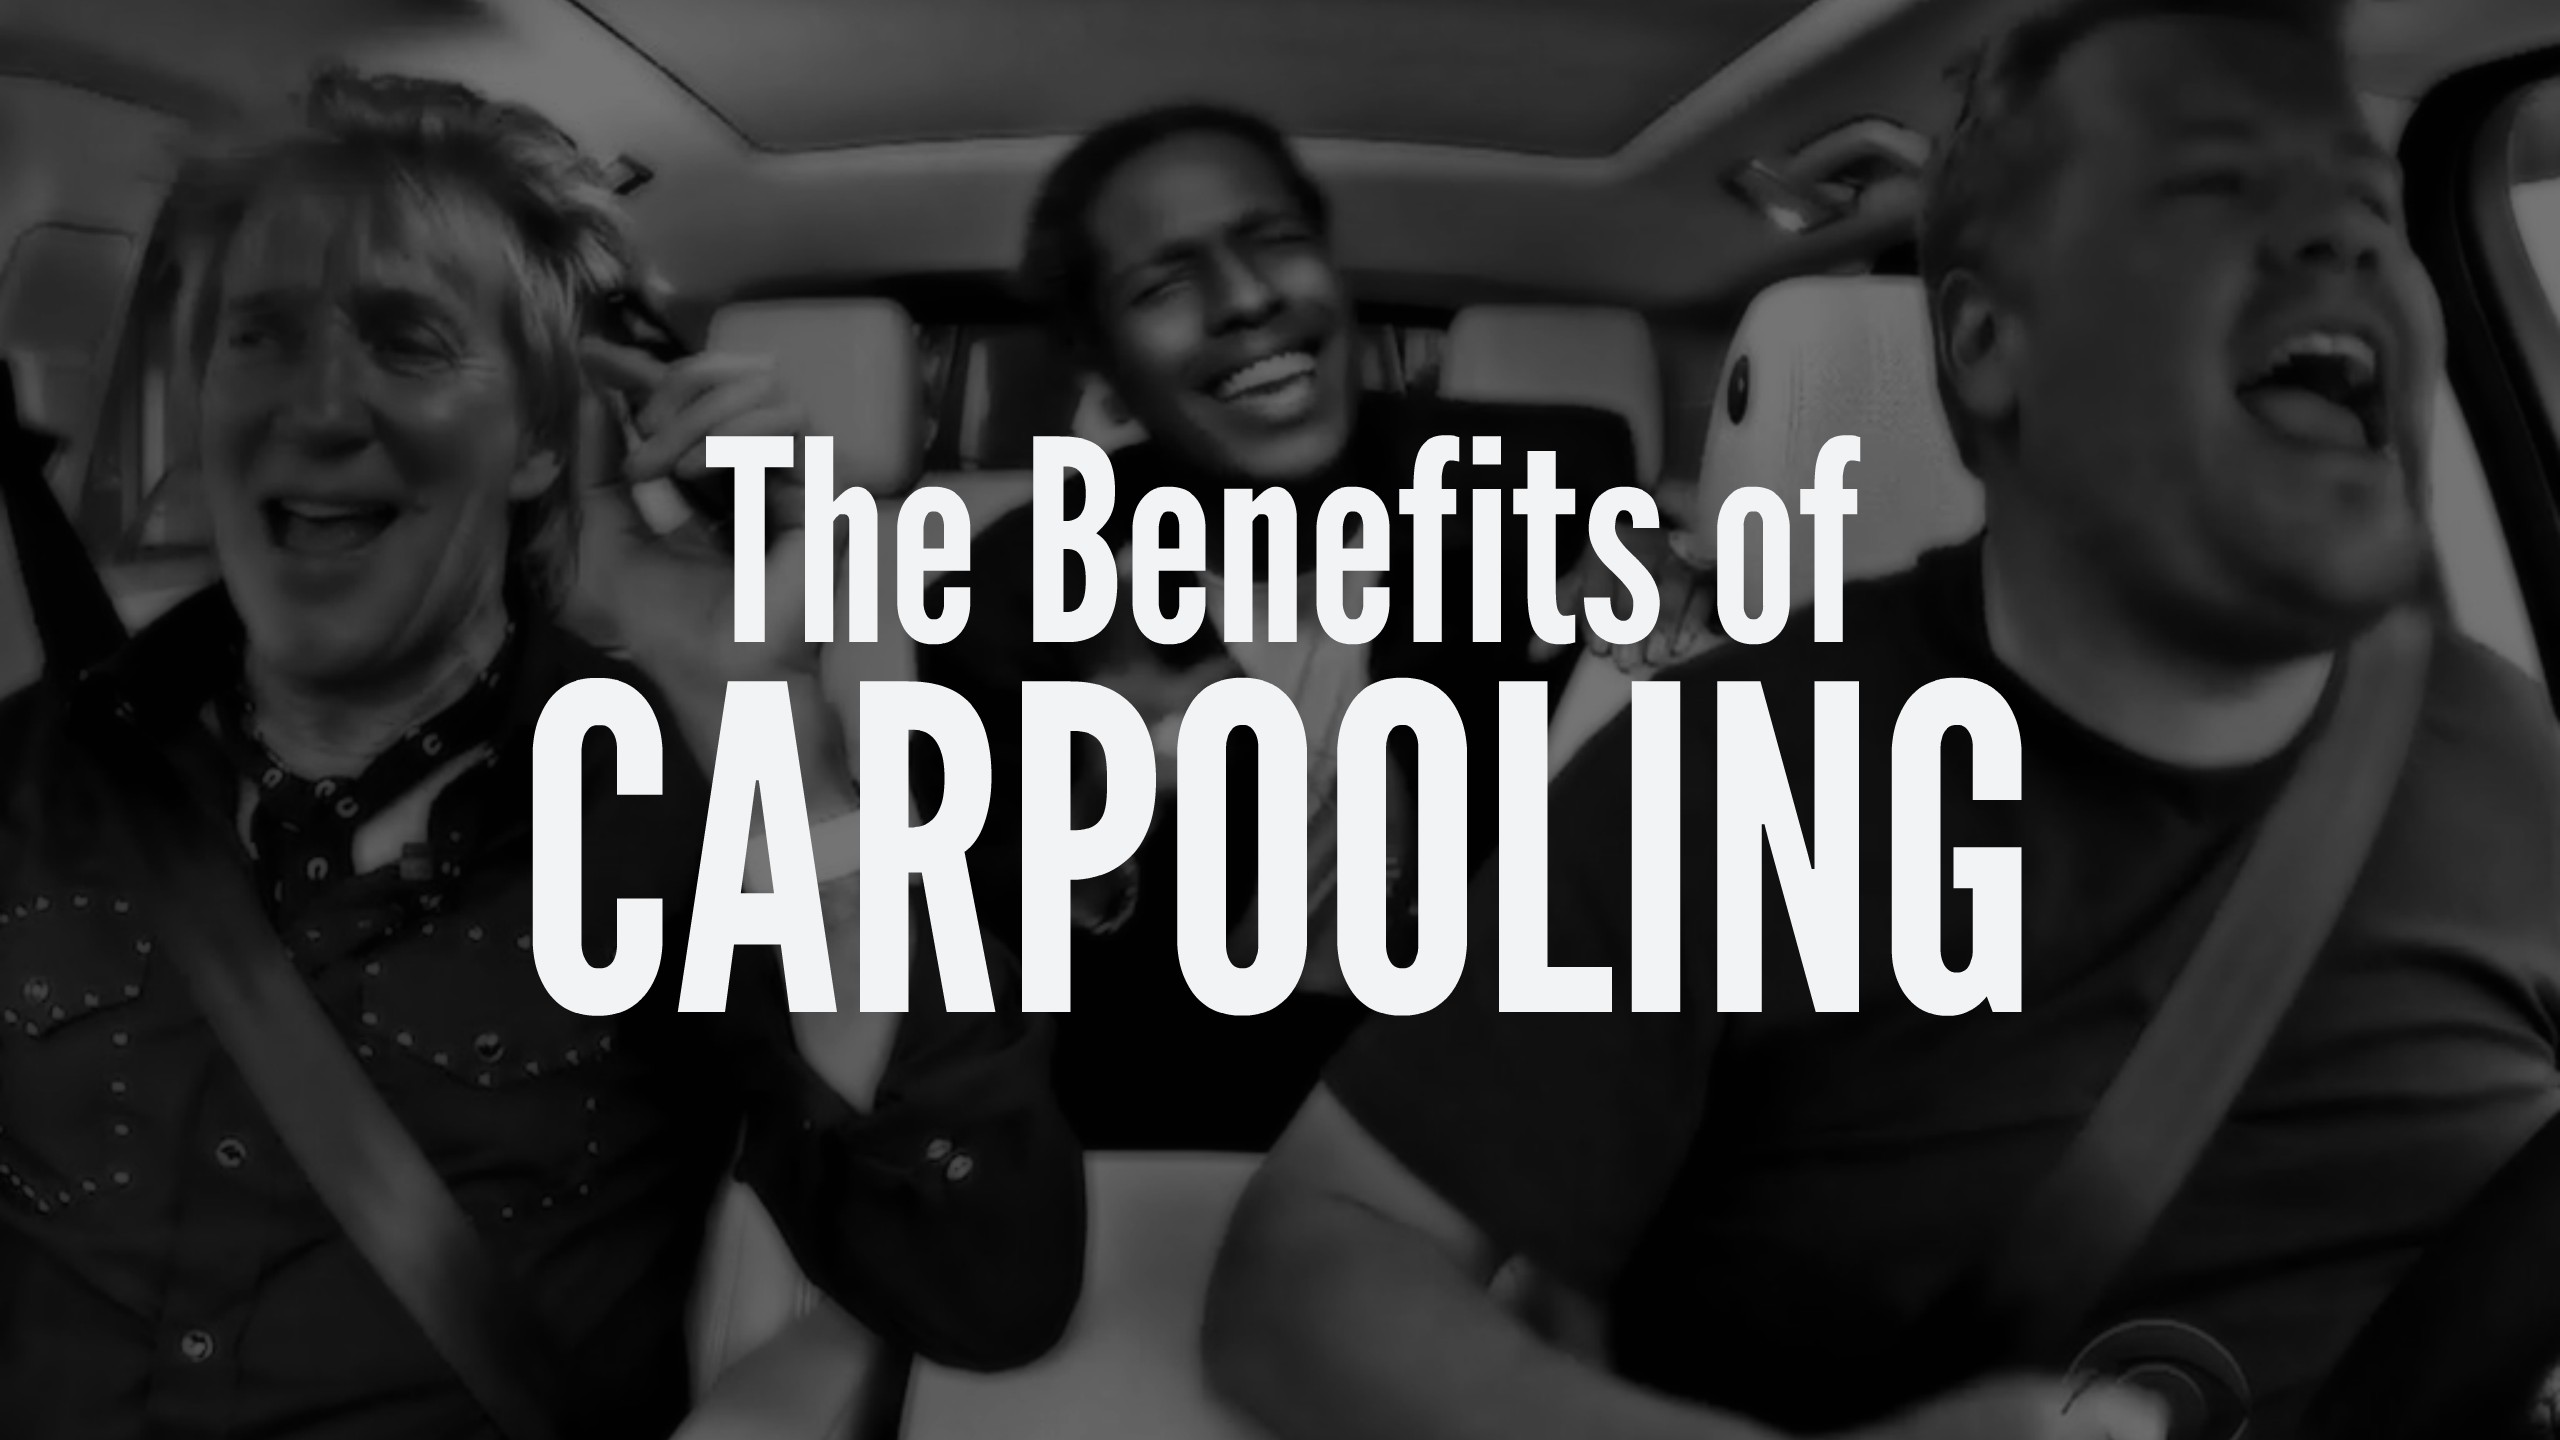 4 Ways You Can Benefit from Carpooling